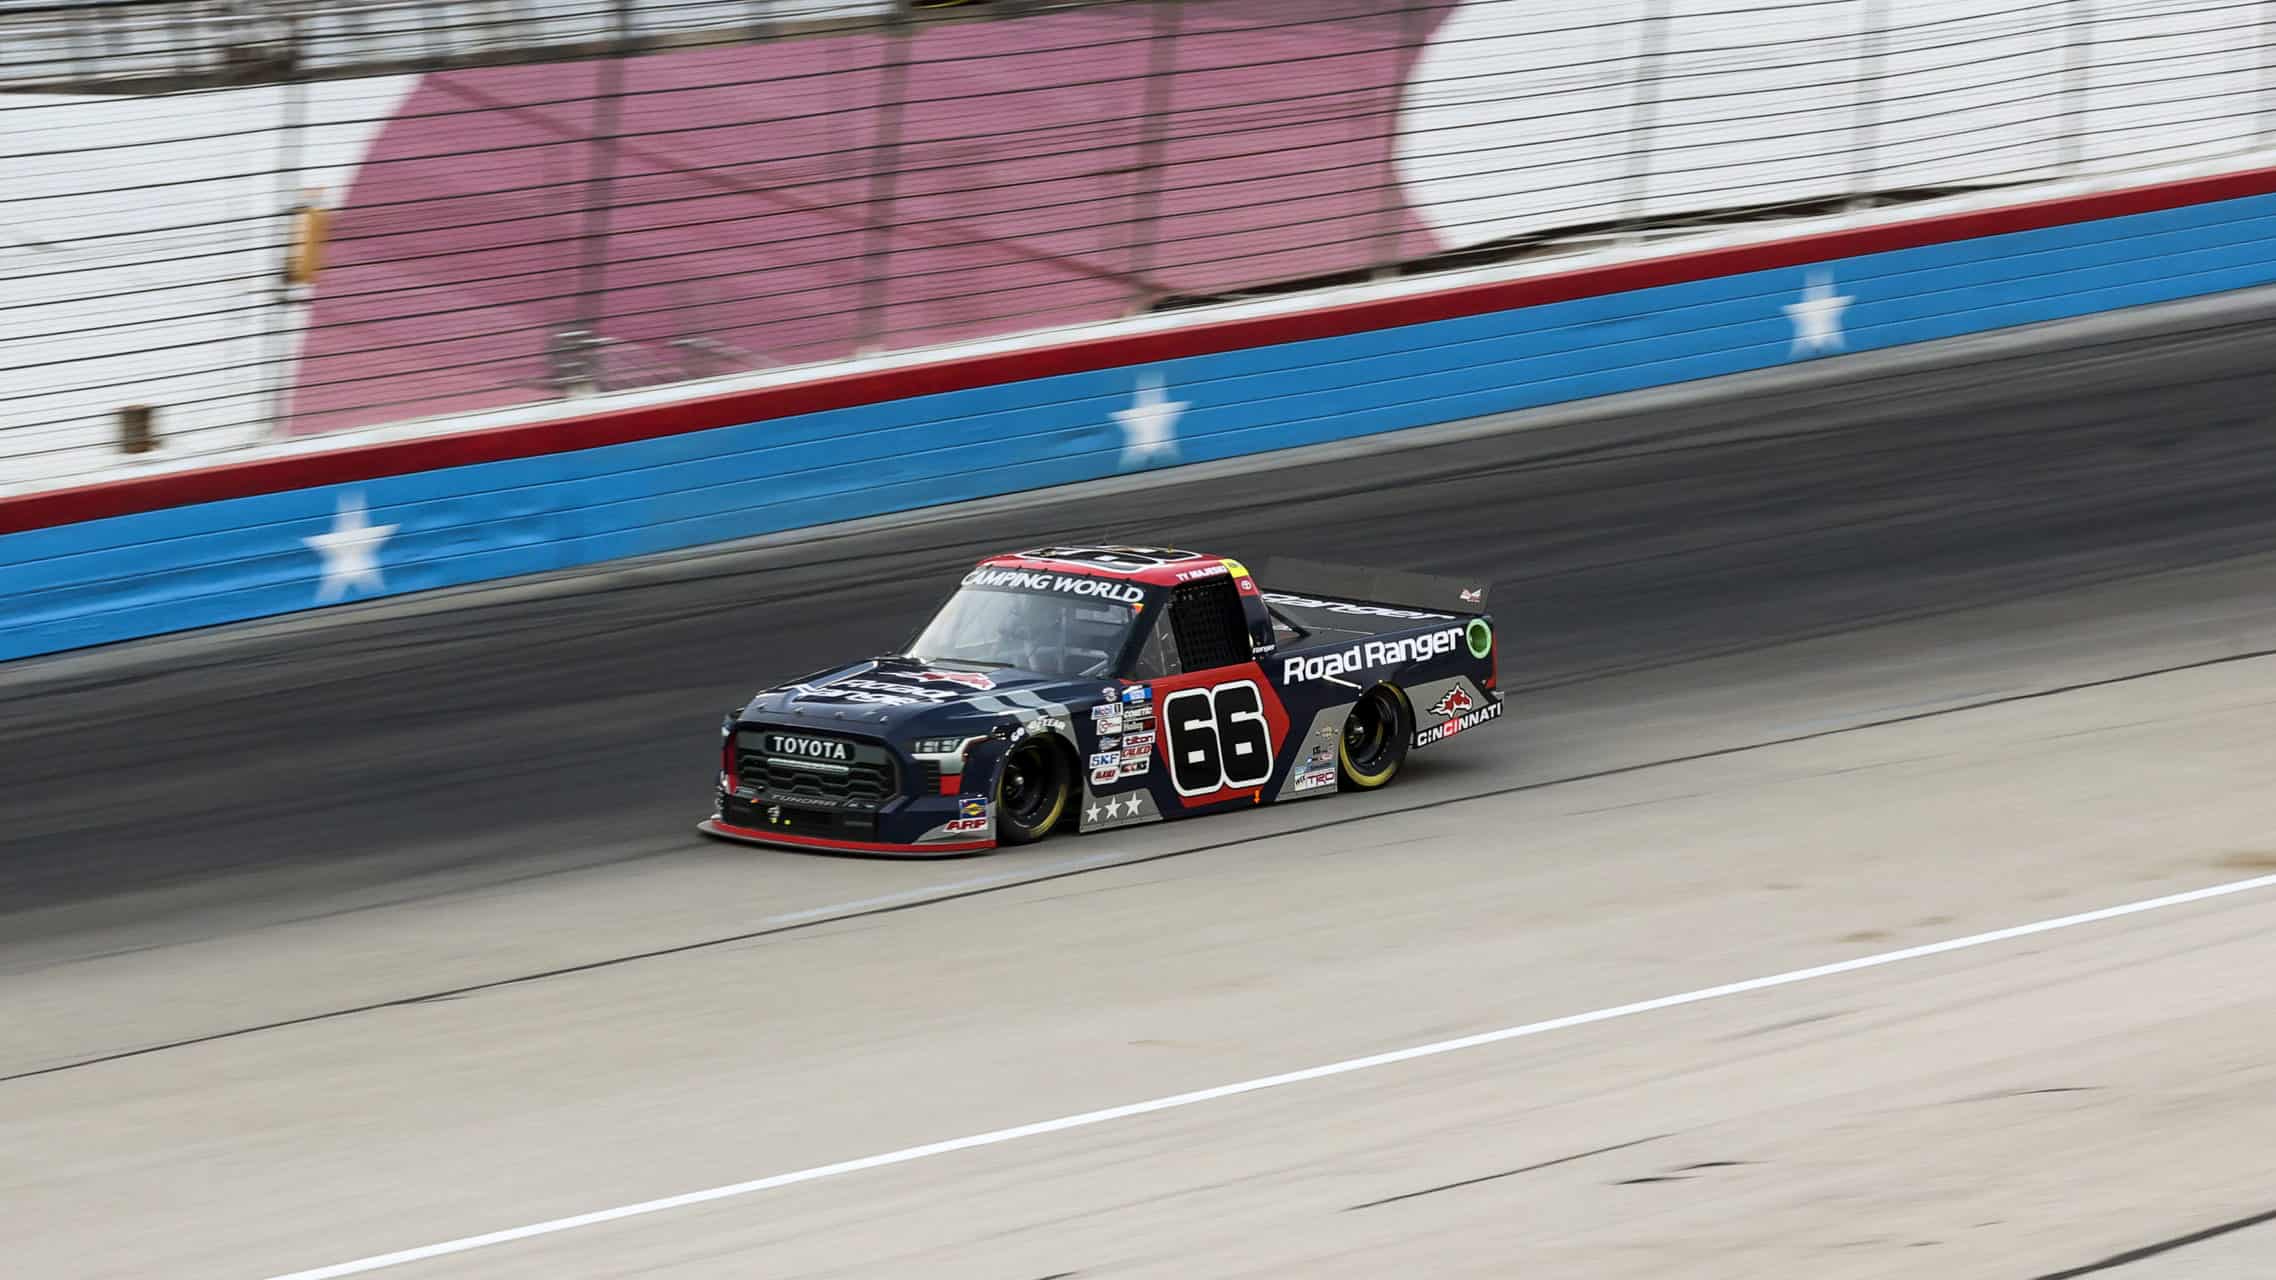 Ty Majeski finishes fifth in the SpeedyCash.com 220 for ThorSport Racing at Texas Motor Speedway in the NASCAR Camping World Truck Series. Photo by Rachel Schuoler.